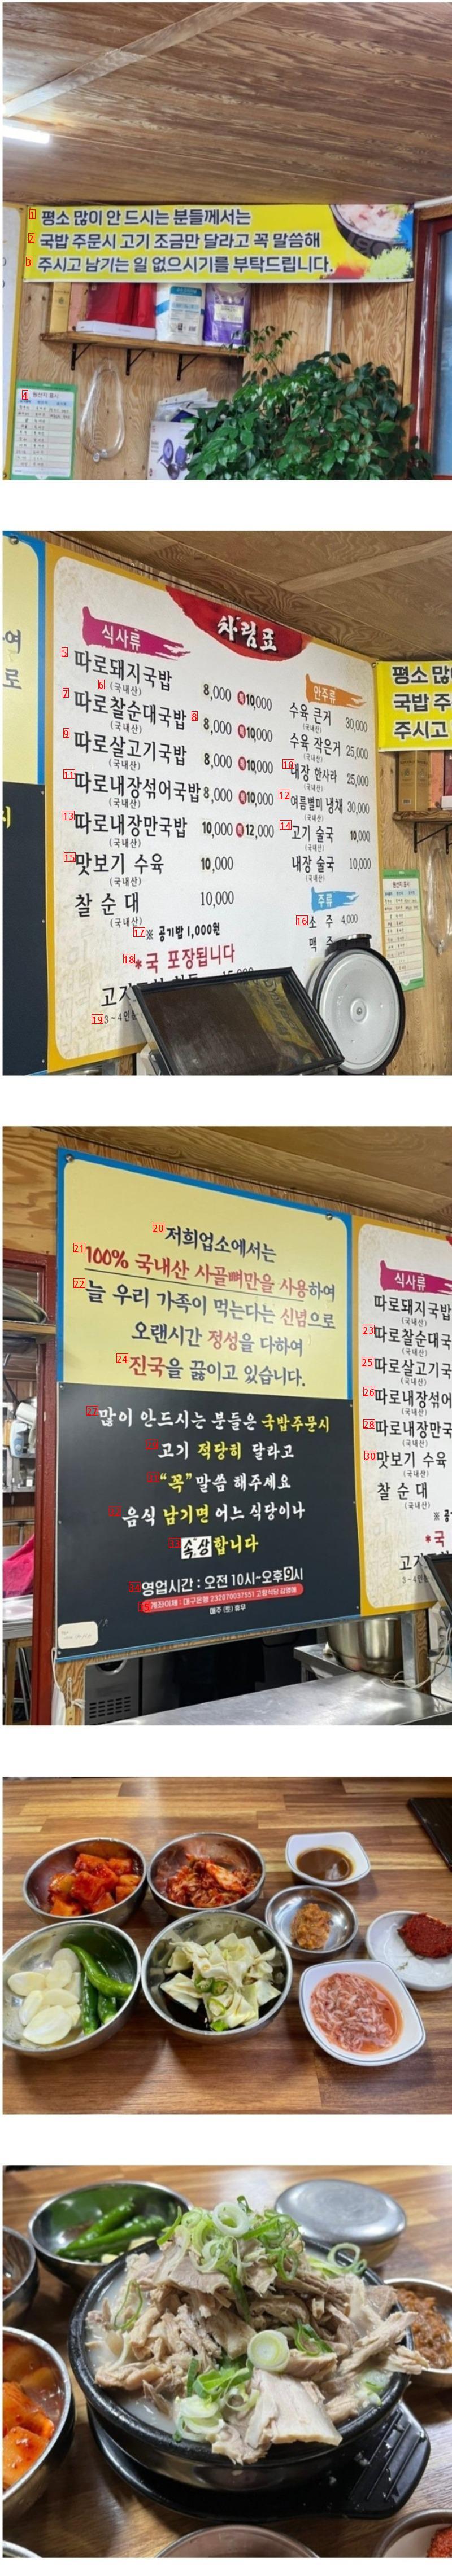 Special rice soup for 10,000 won